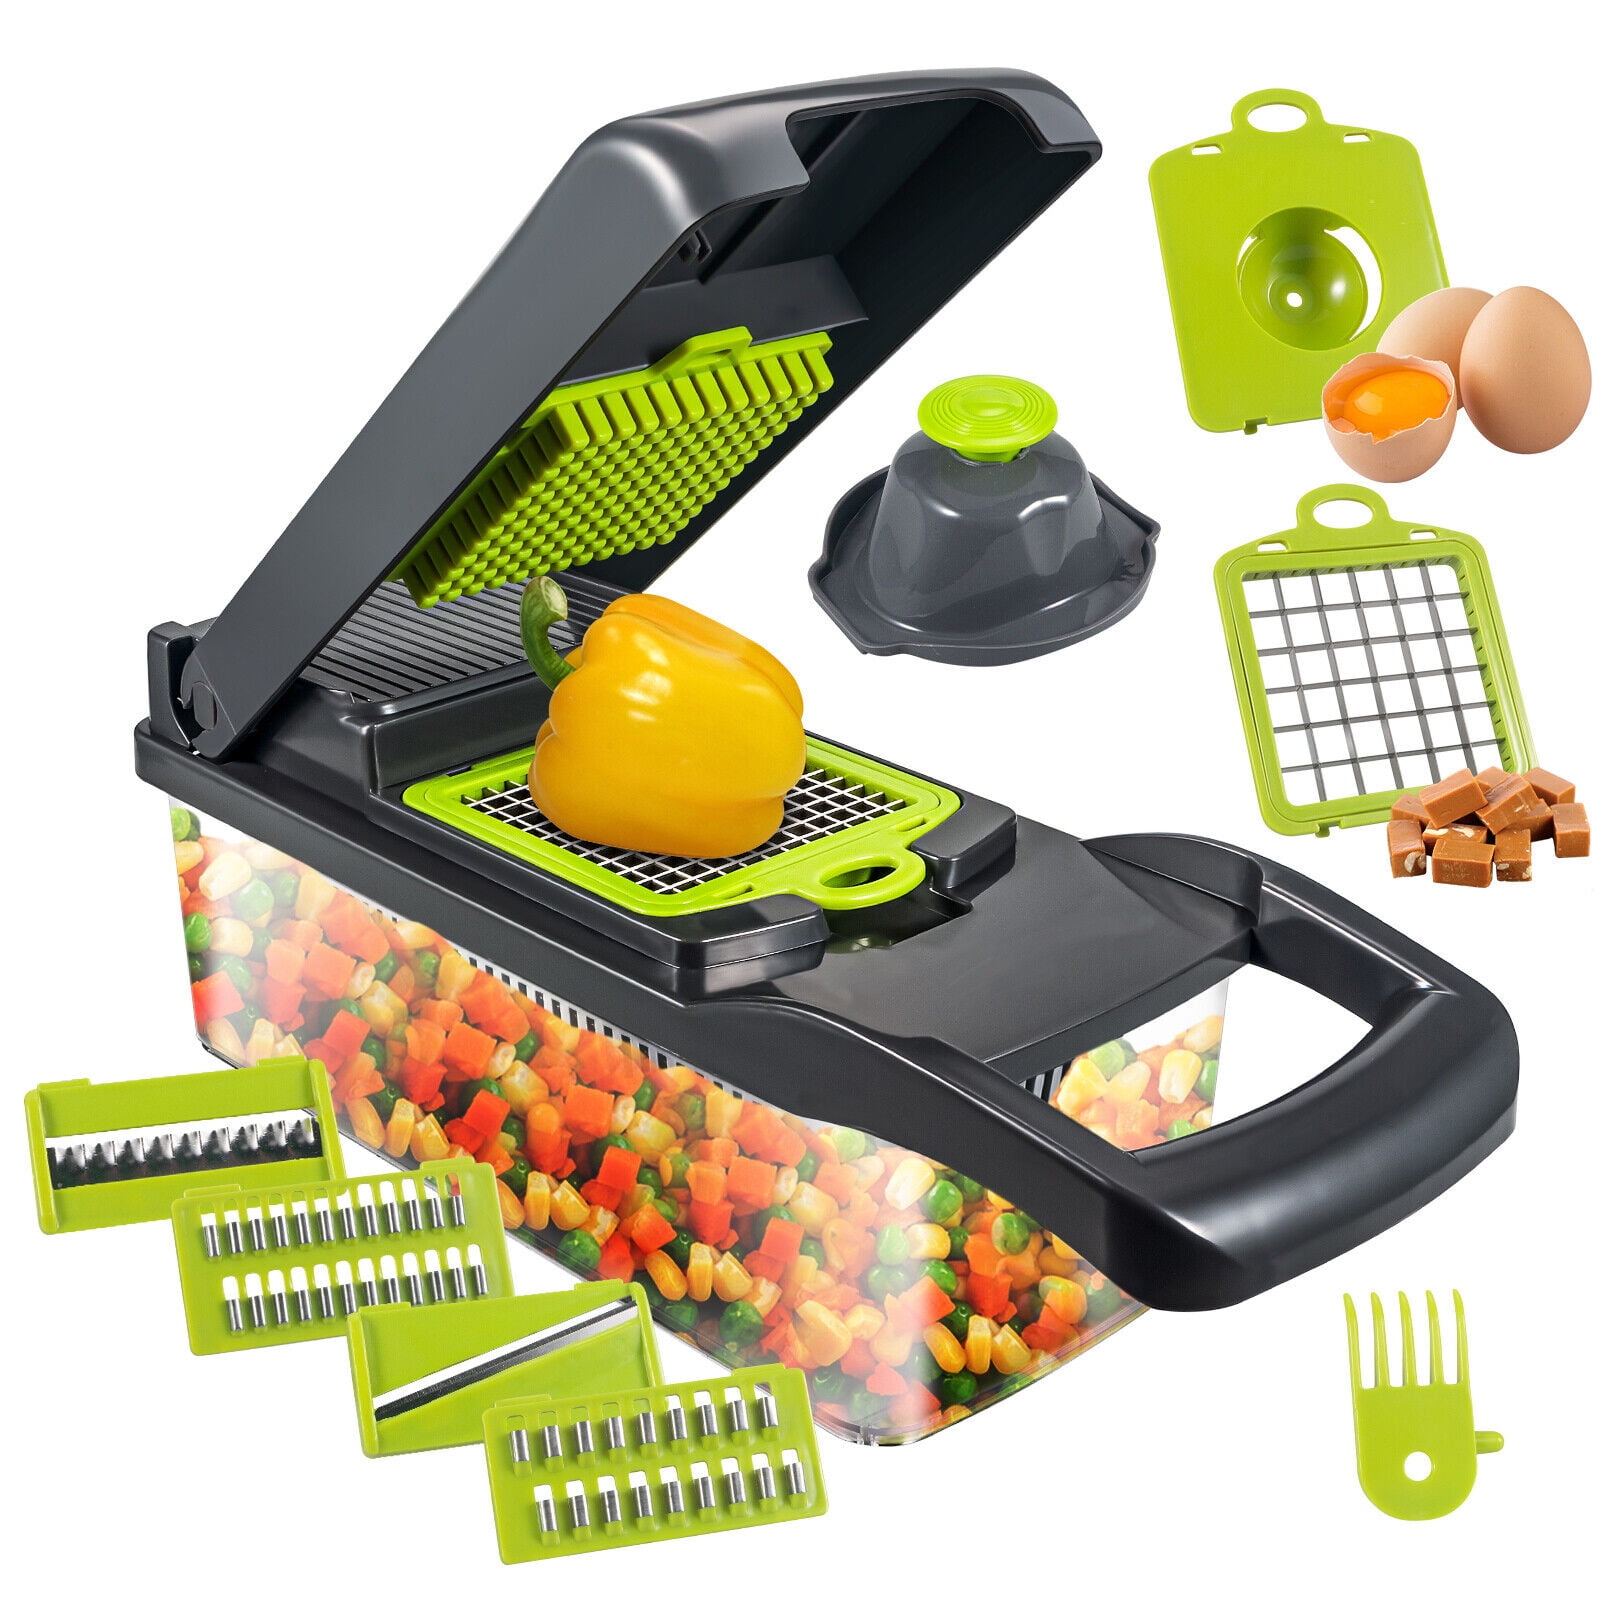 Vegetable Chopper - Time-And Labor-Saving Food Chopper - Pro Onion